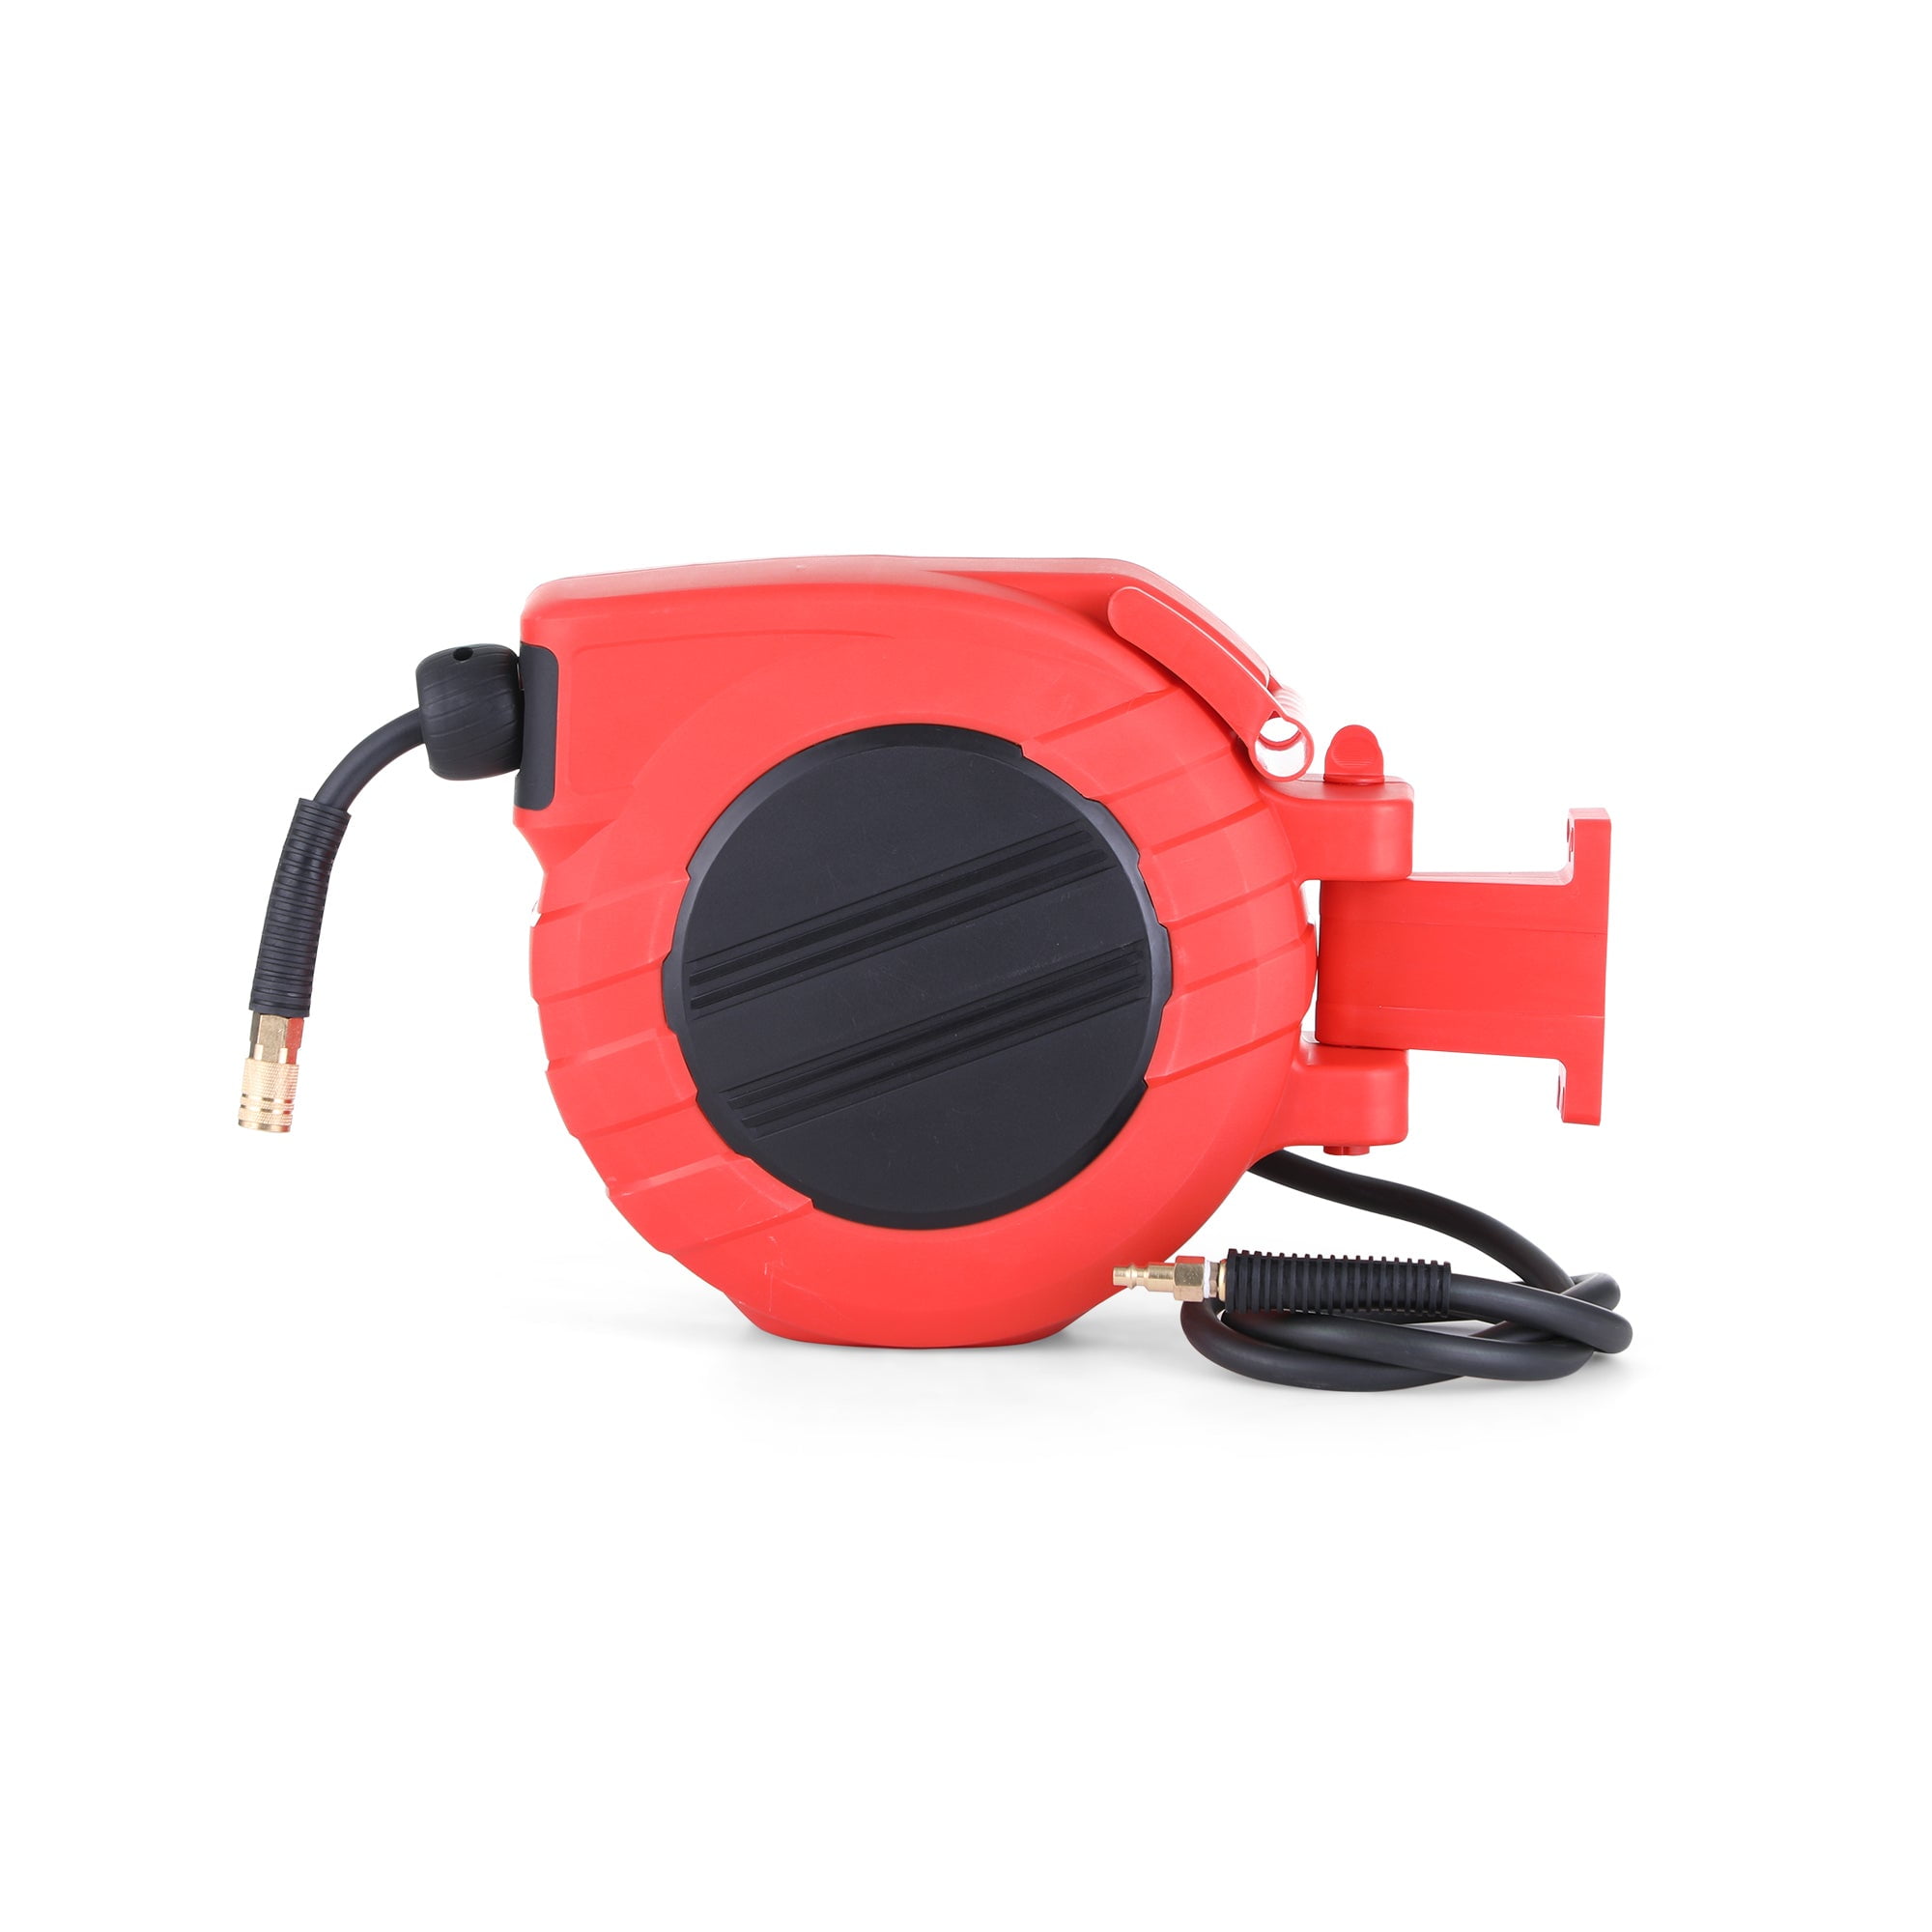 Sophia & William 180°Rotation Retractable 50ft Wall Mounted Air Hose Reel -  Red